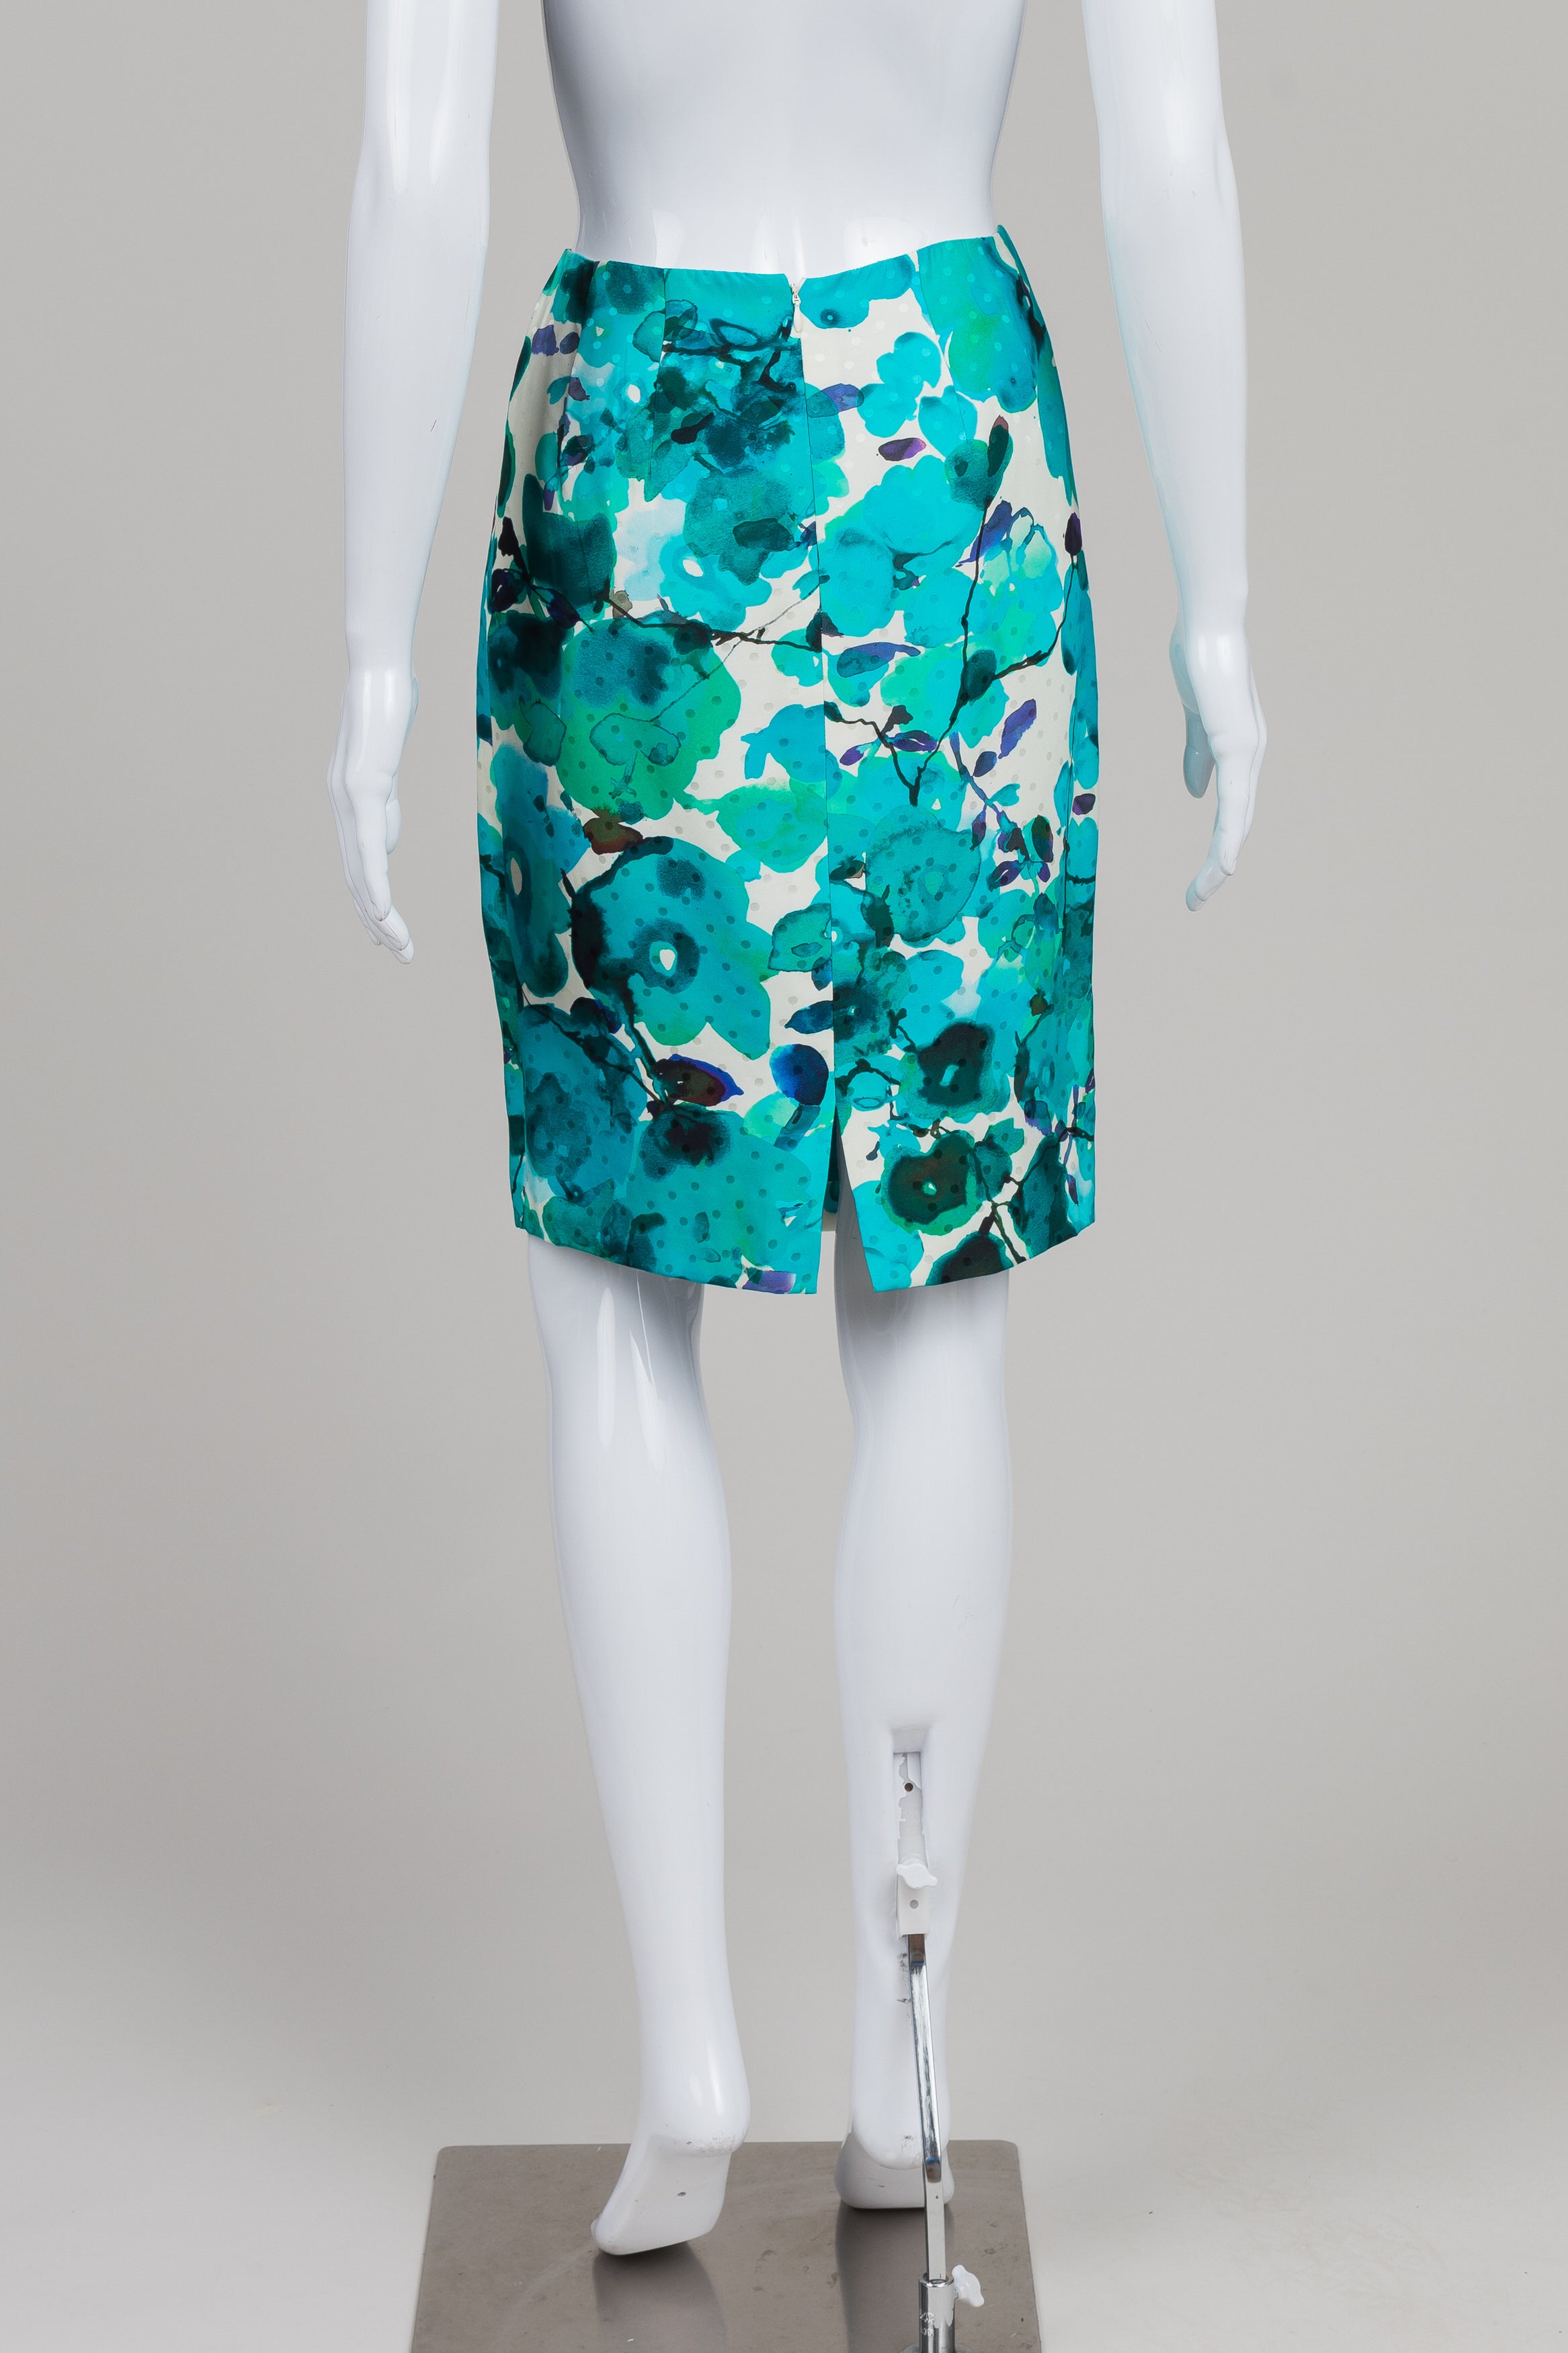 Custom Made Turquoise Floral Print Pencil Skirt